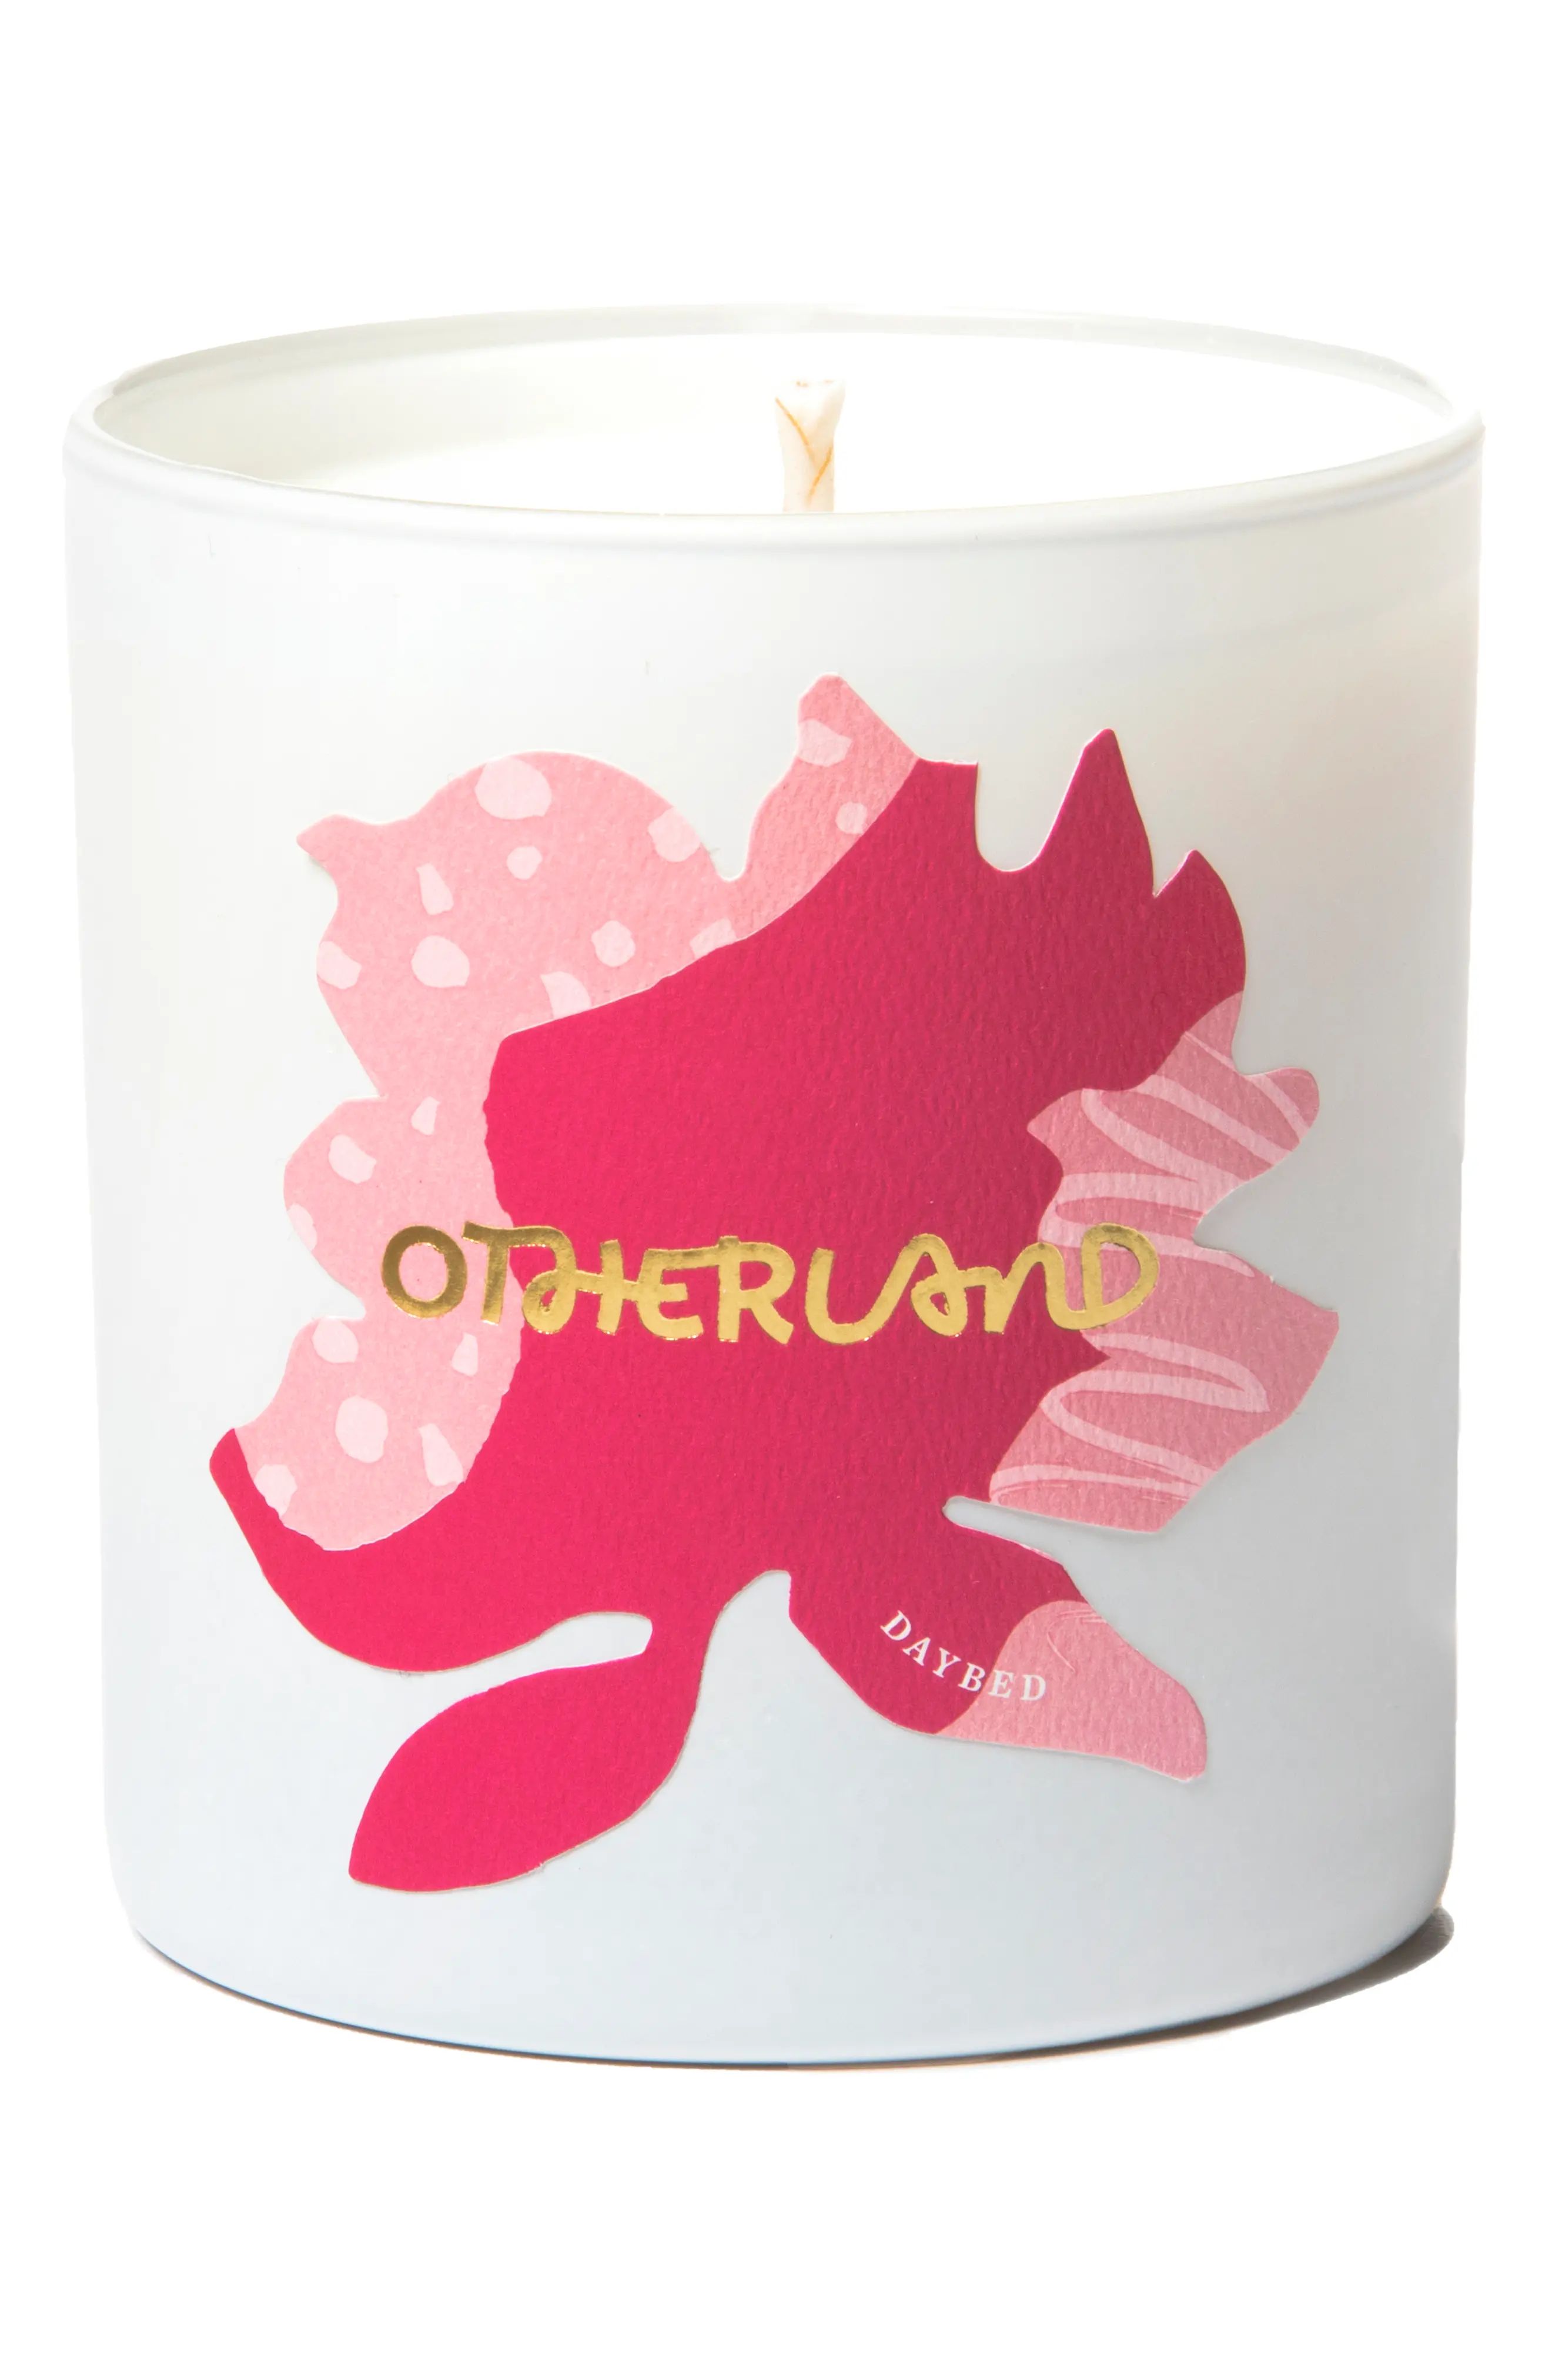 Otherland Daybed Scented Candle | Nordstrom